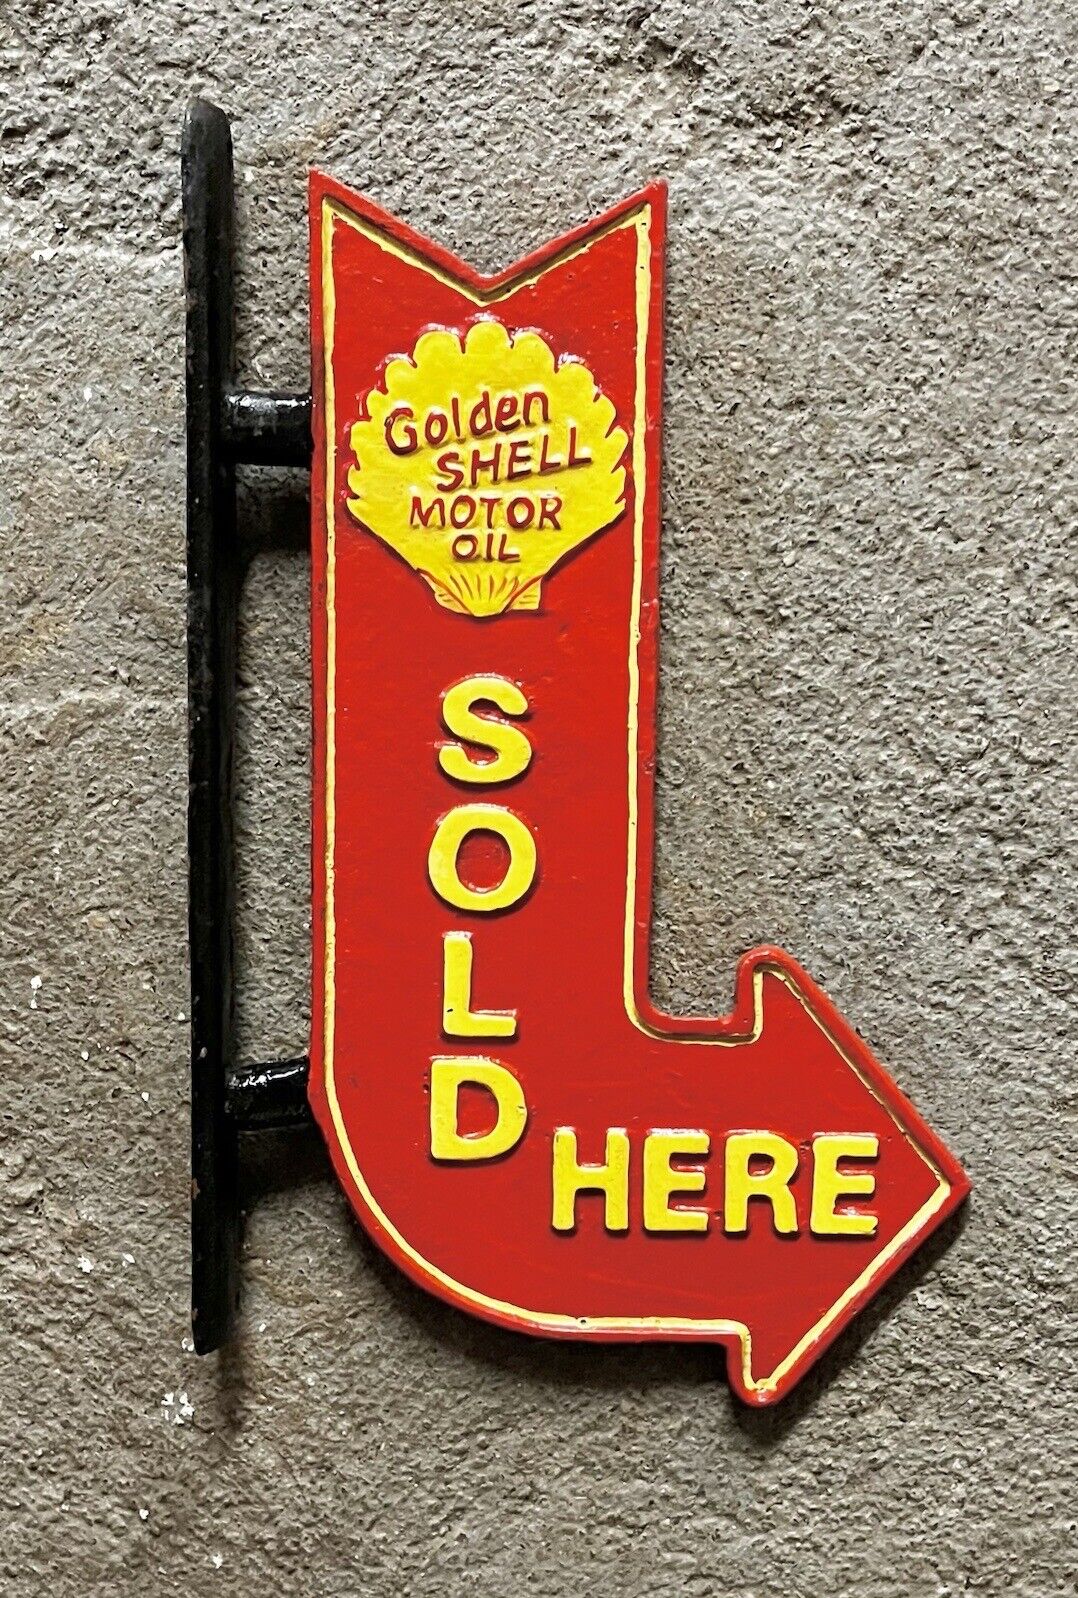 Golden SHELL Motor Oil “SOLD HERE” Cast Iron Flange Arrow Sign, 12” x 7”